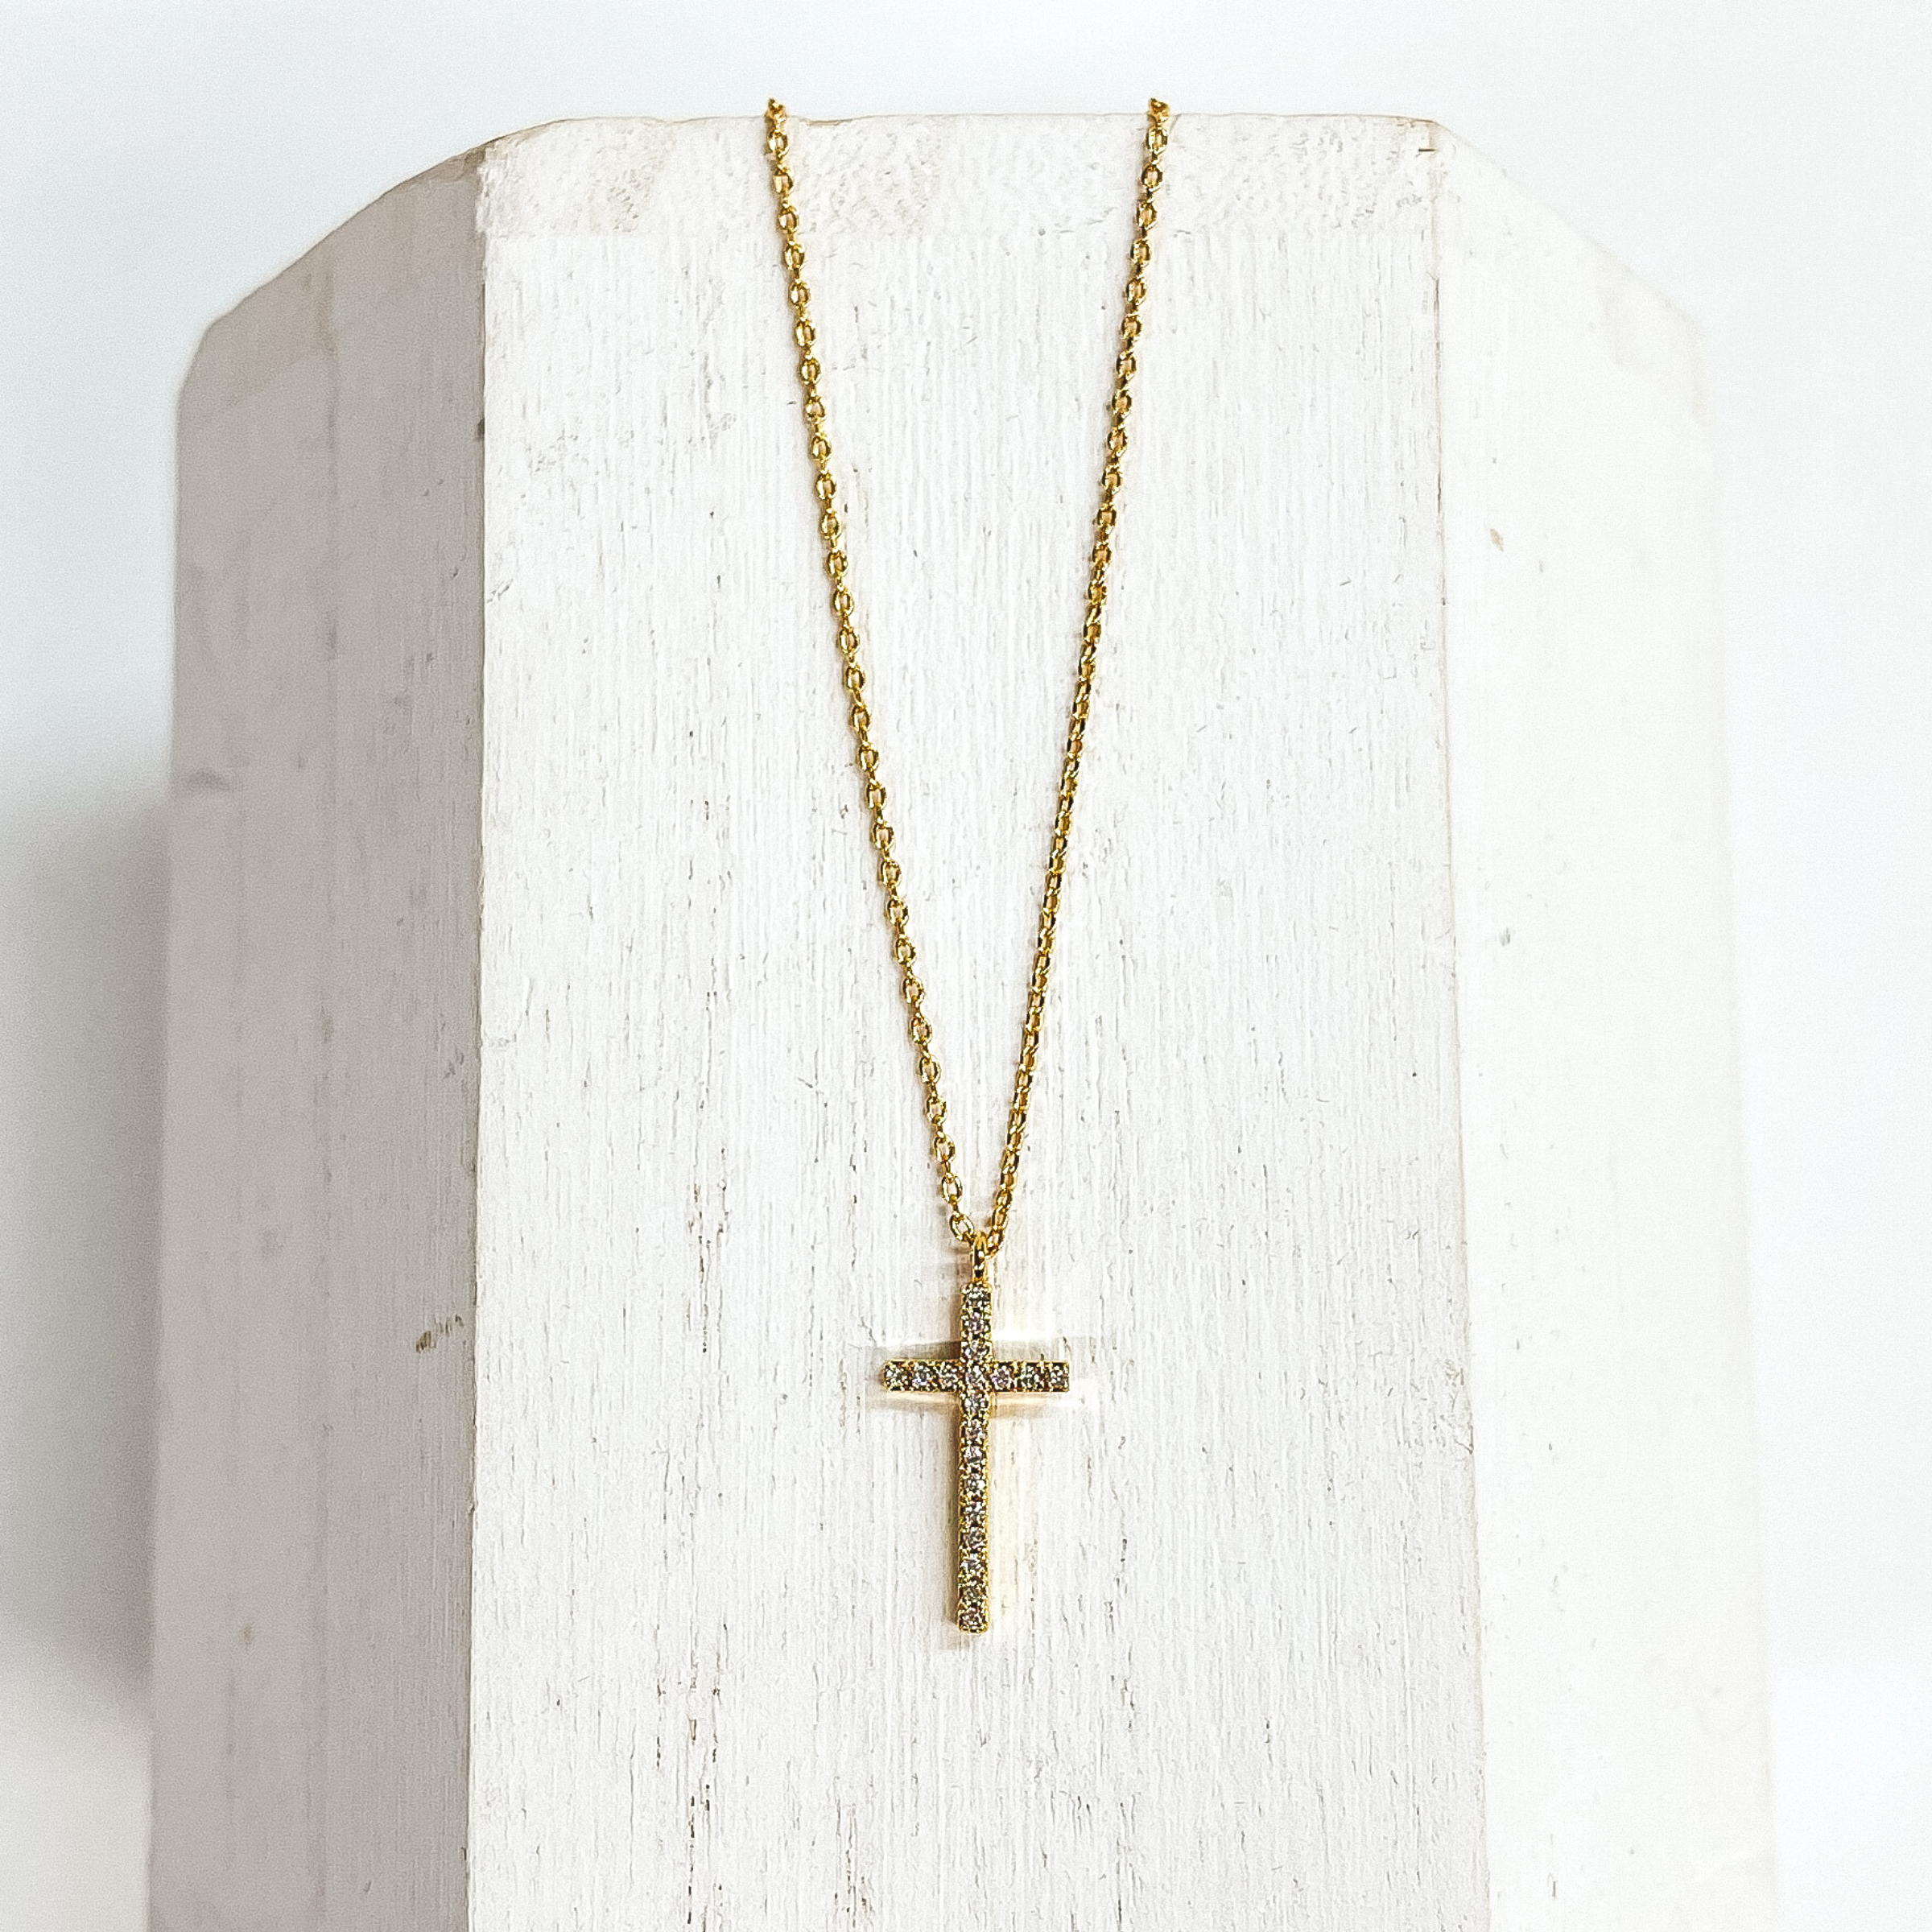 Gold Dipped Chain Necklace with a Clear Crystal Cross Pendant - Giddy Up Glamour Boutique